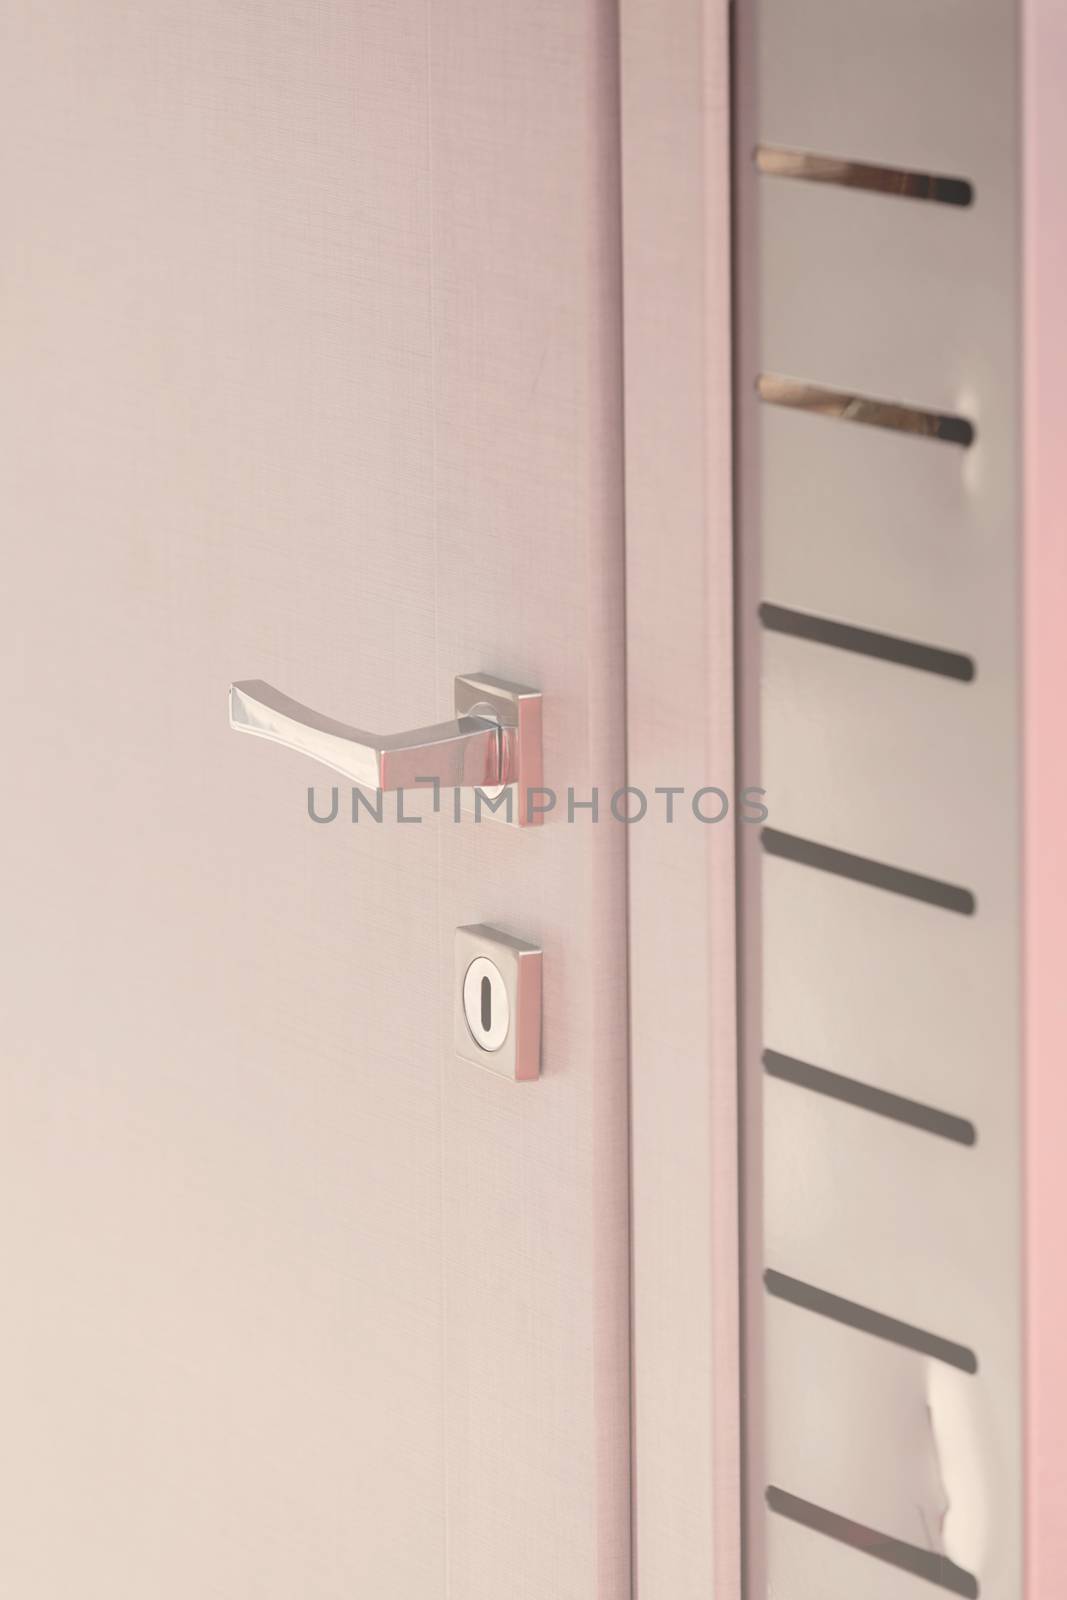 system to close doors, note shallow depth of field